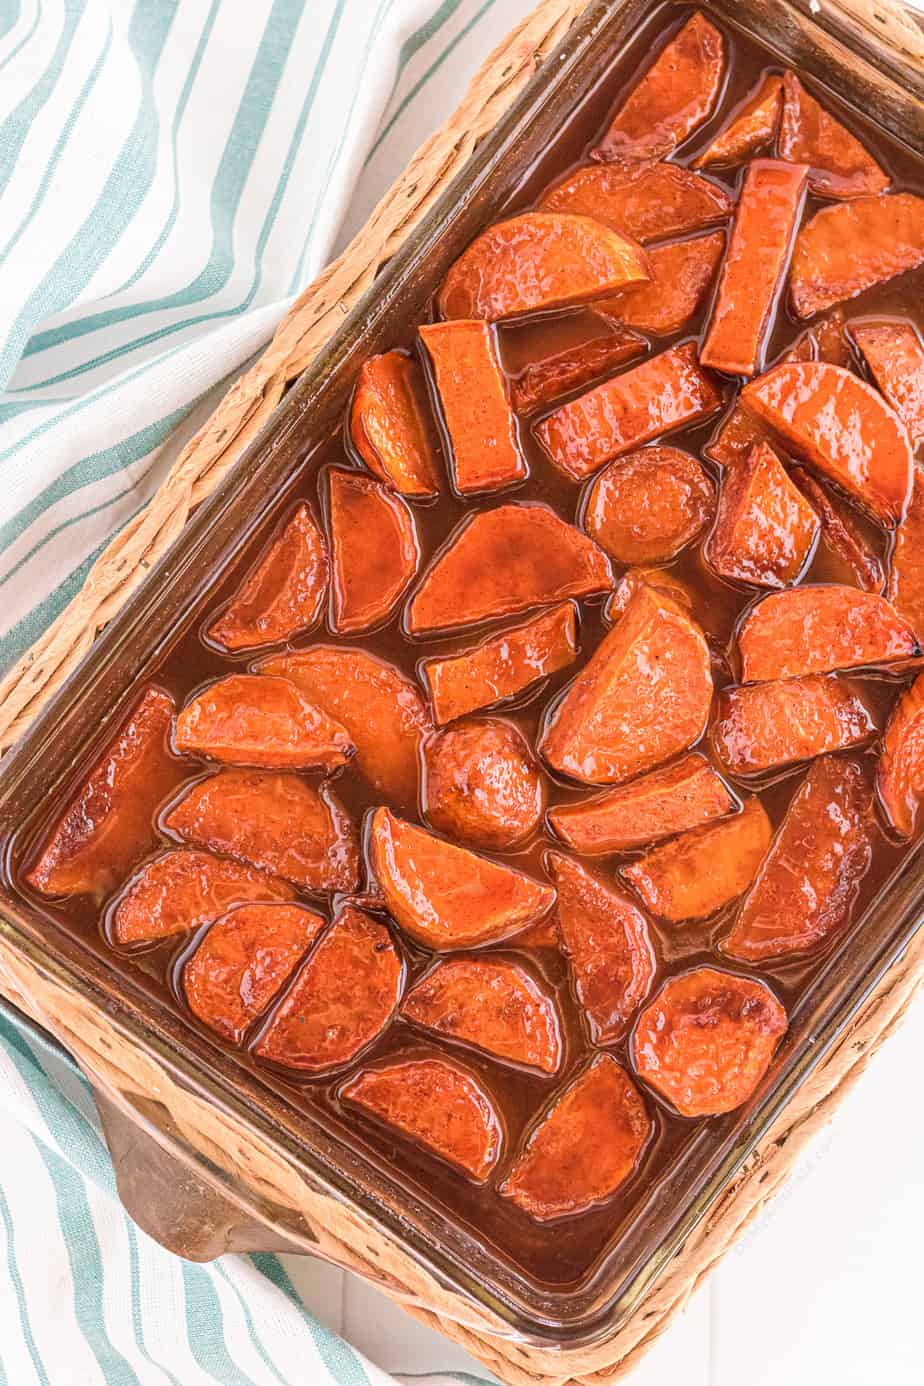 Cooked glazed yams in a brown sauce in a baking dish from overhead